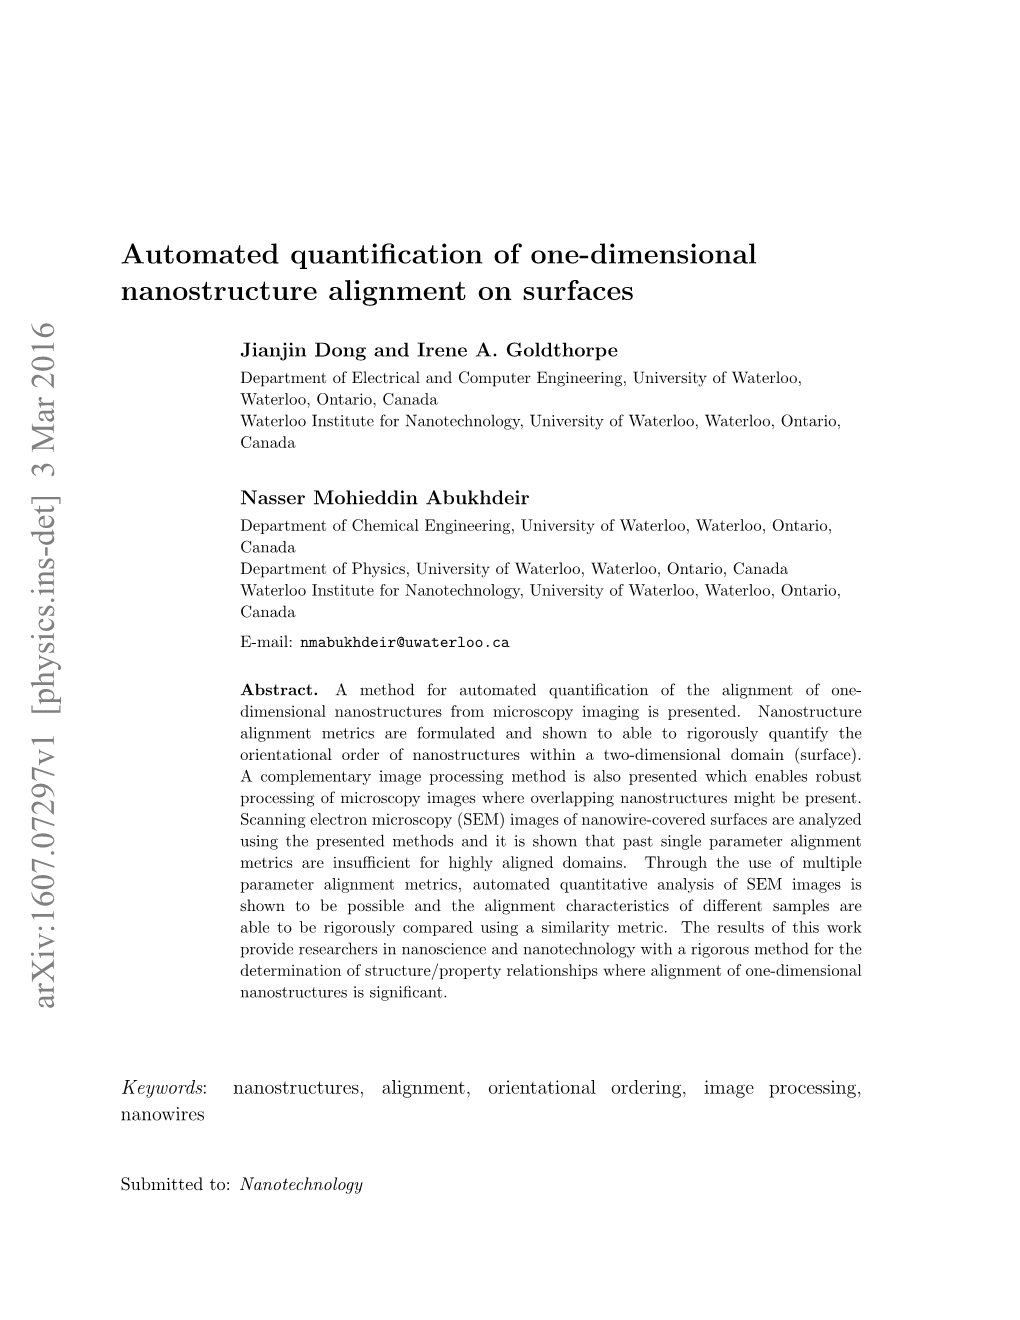 Automated Quantification of One-Dimensional Nanostructure